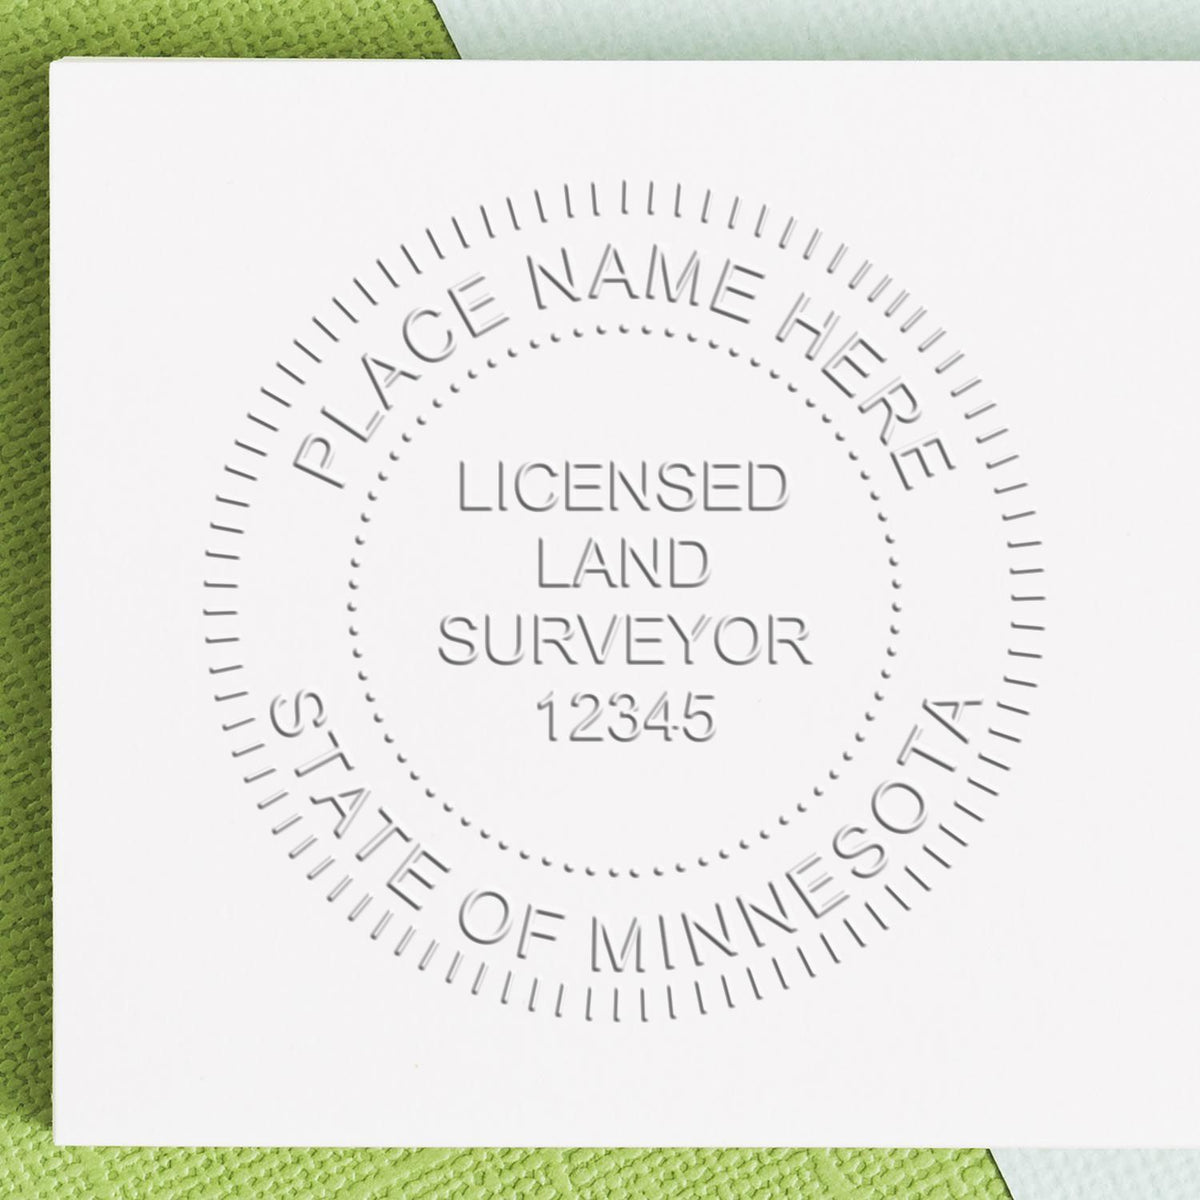 The Gift Minnesota Land Surveyor Seal stamp impression comes to life with a crisp, detailed image stamped on paper - showcasing true professional quality.